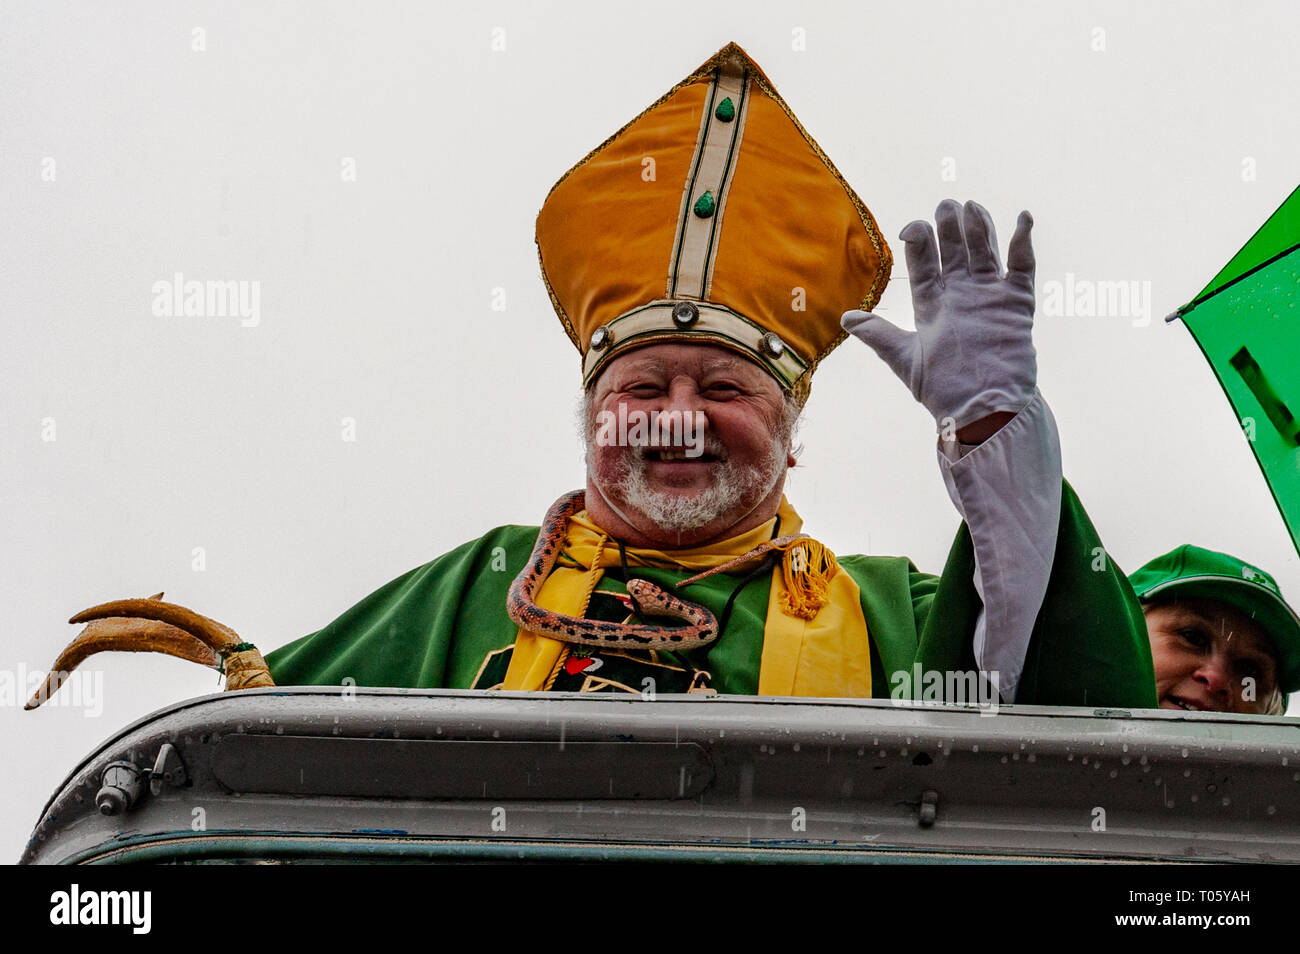 Birmingham, UK. 17th March, 2019.  The Birmingham St. Patrick's Day parade took place today in front of 90,000 people amidst sun and heavy hail showers. Credit: AG News/Alamy Live News. Stock Photo